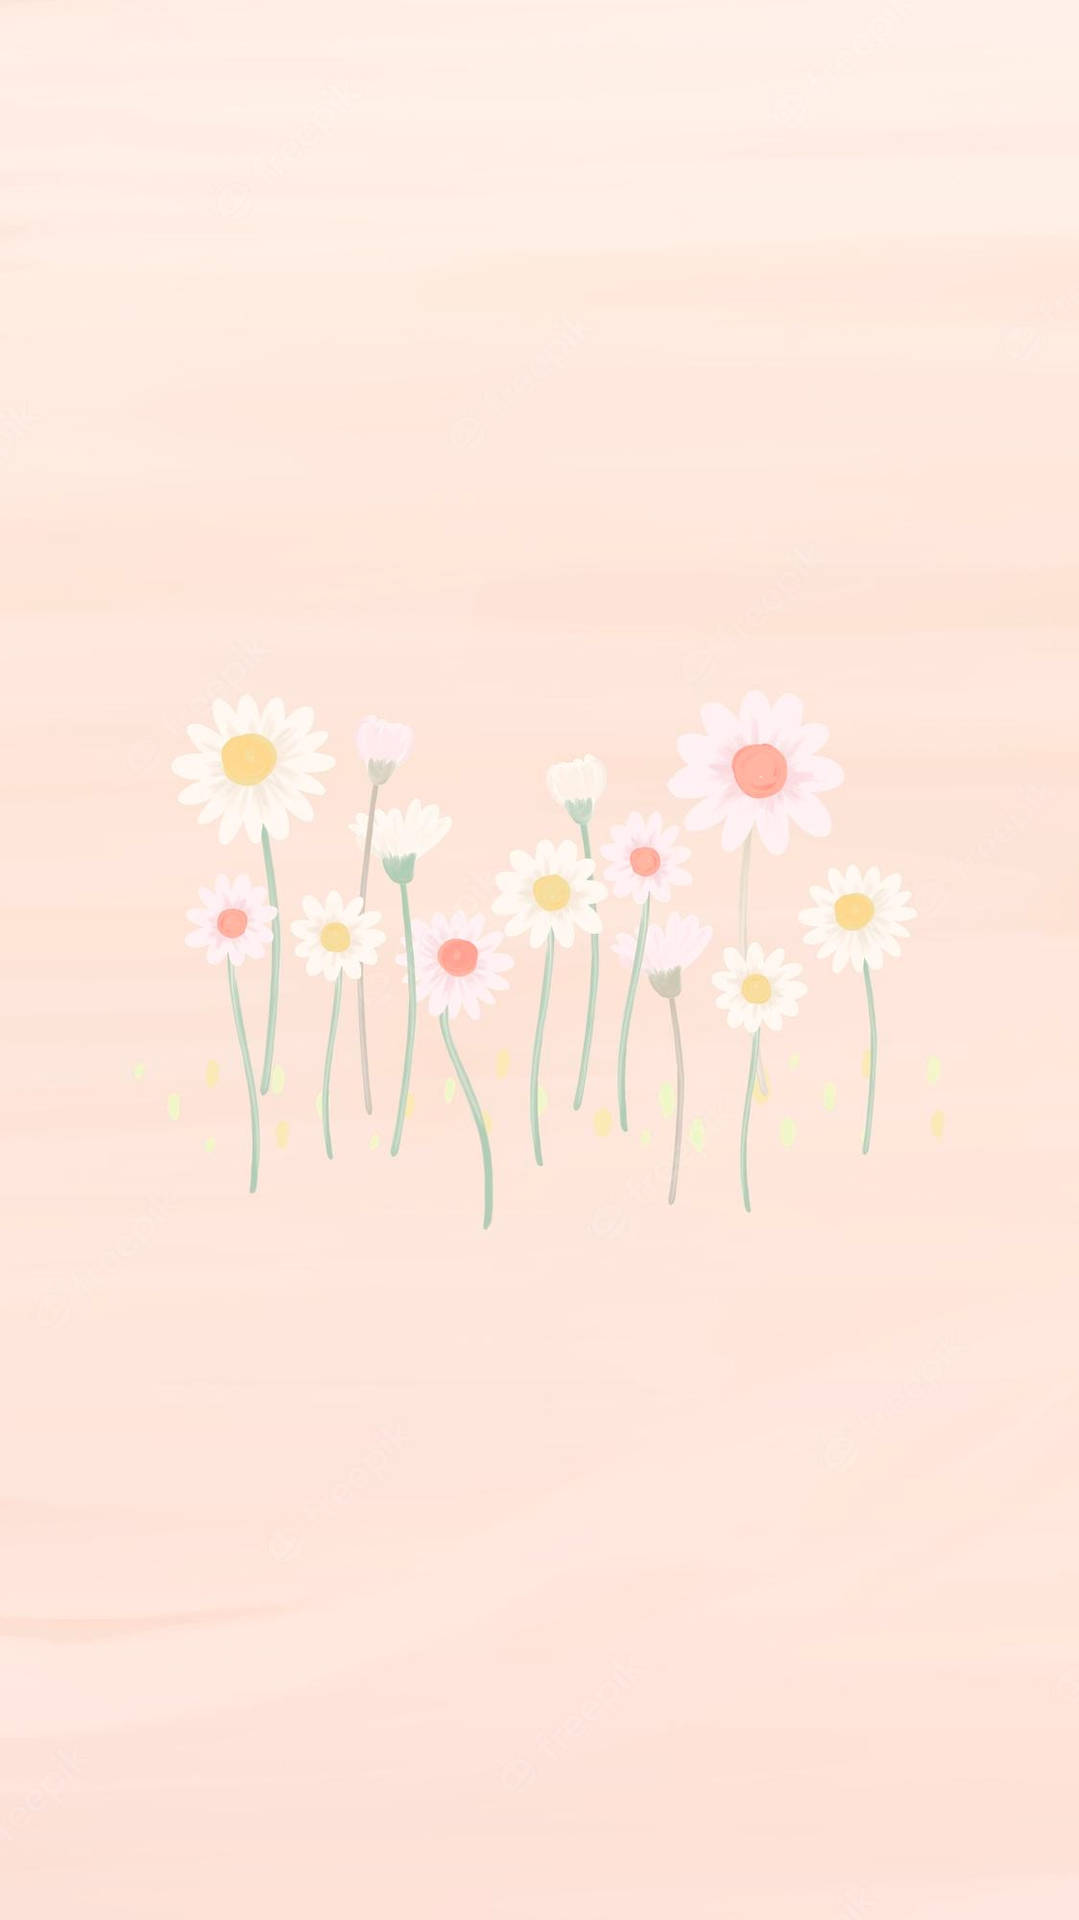 Daisies On A Pink Background Wallpaper